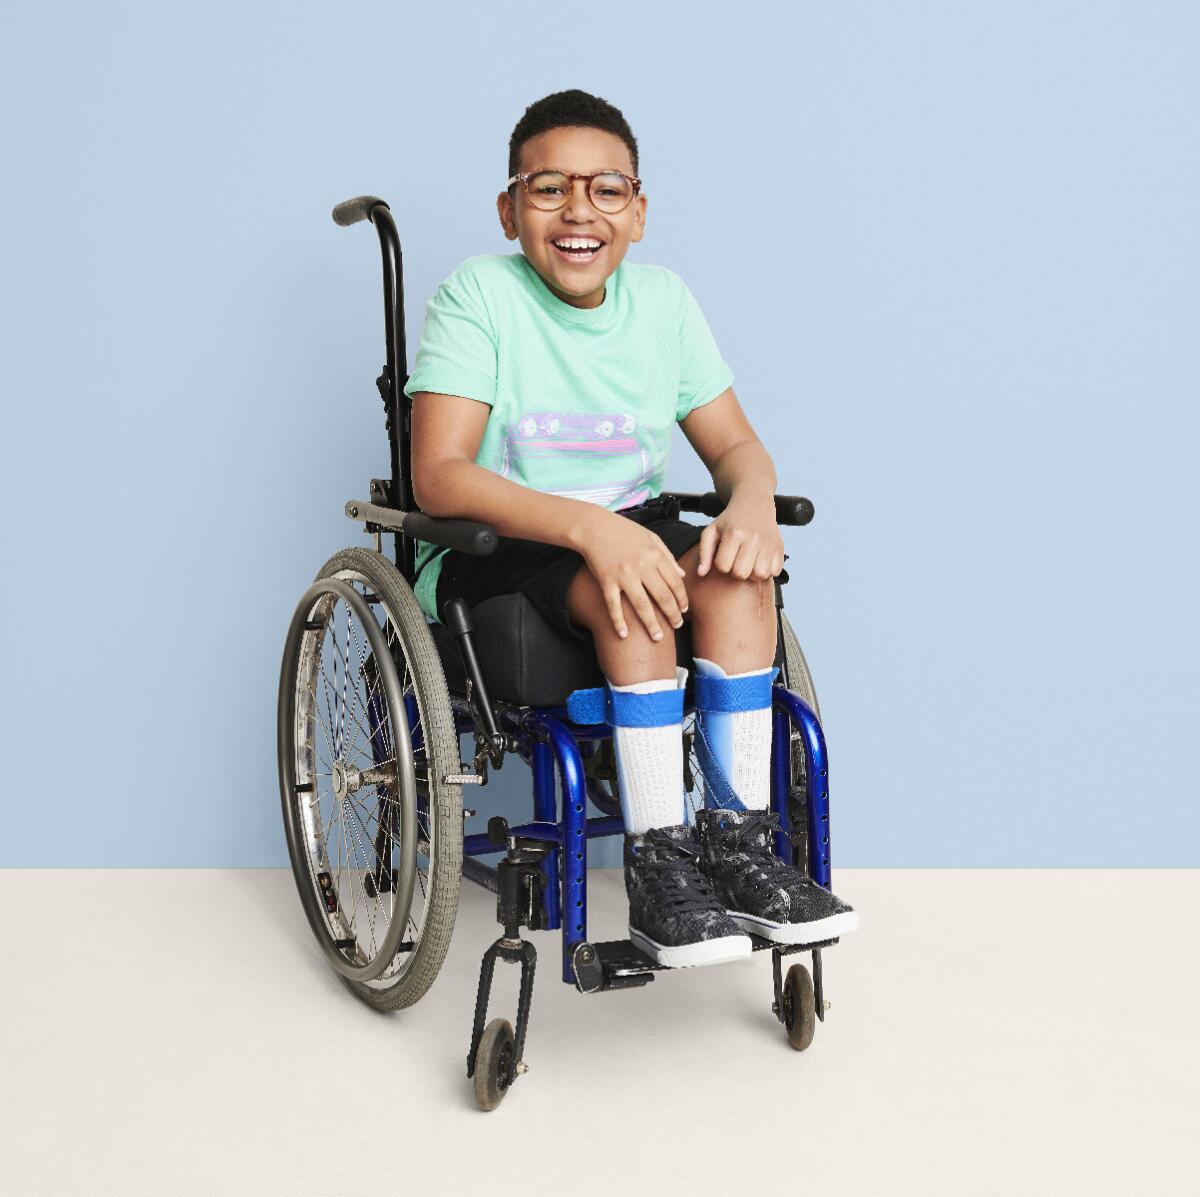 Target's Cat & Jack children's fashion line includes adaptive clothing.